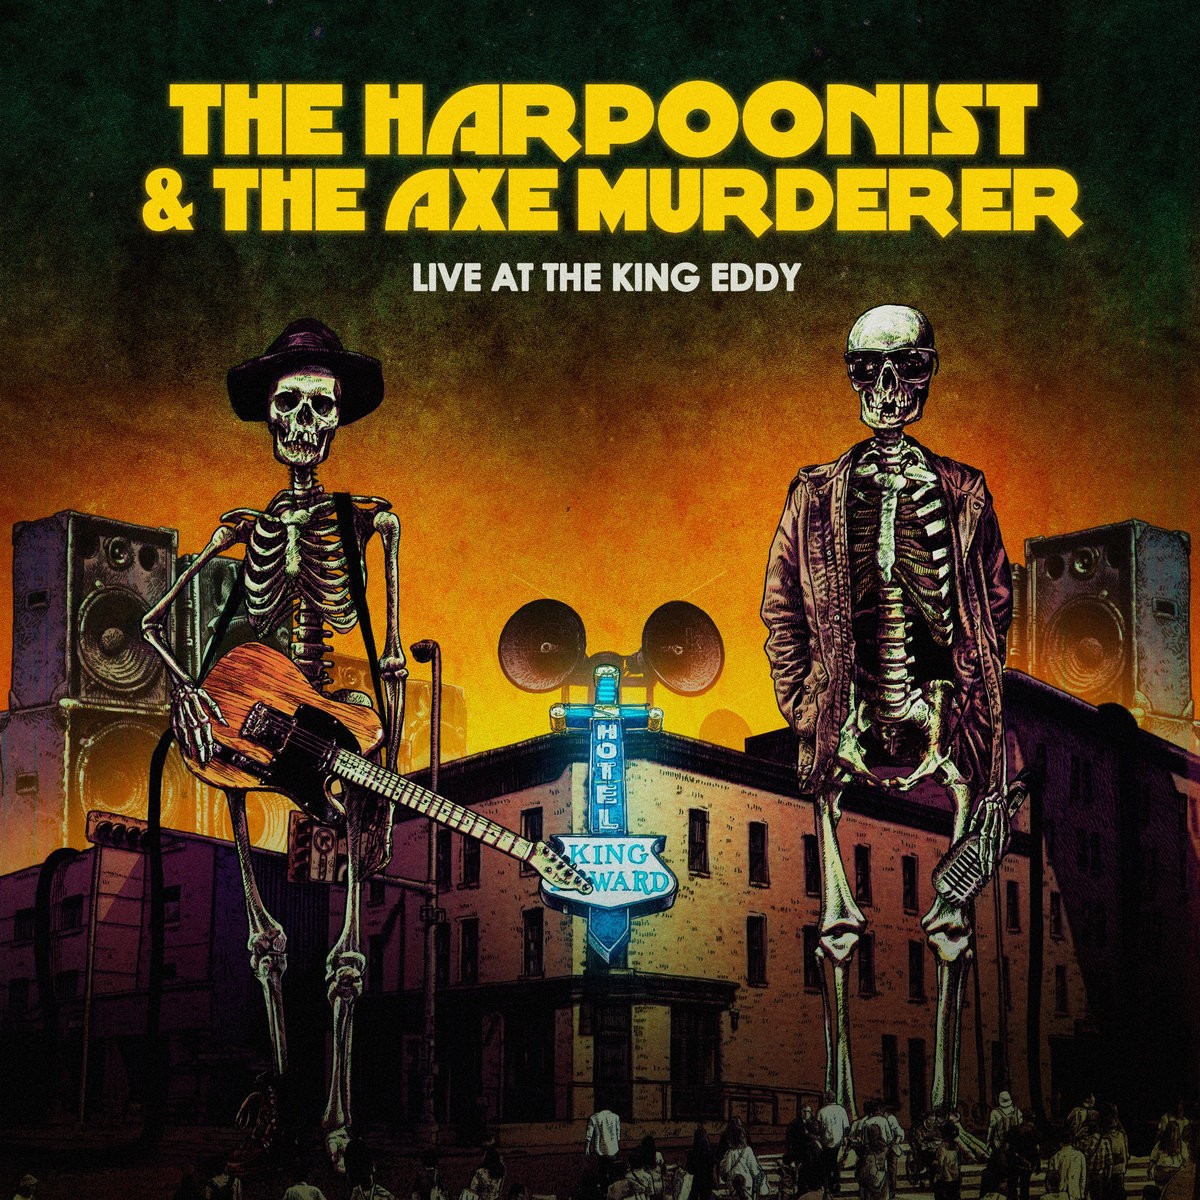 The Harpoonist & The Axe Murderer - Live At The King Eddy